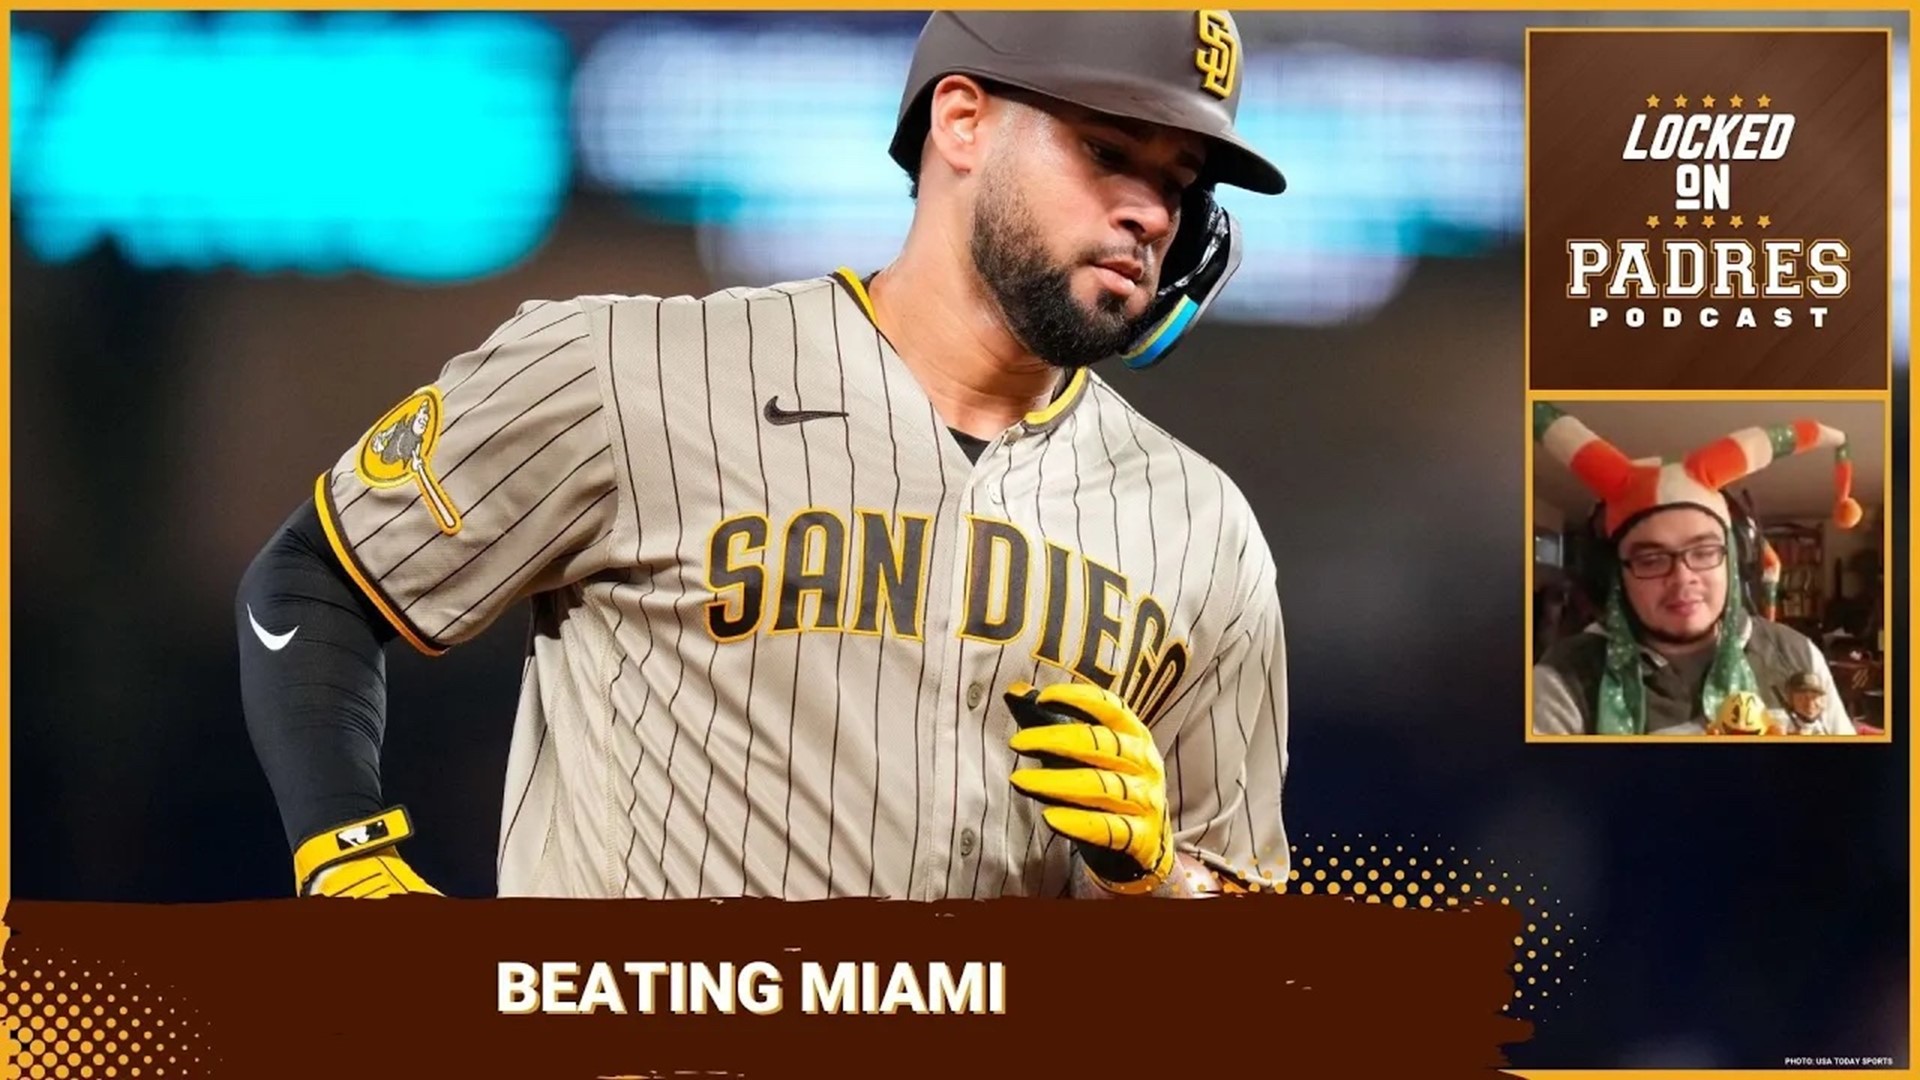 On today's episode, Javier recaps a WILD finish to this Padres/Marlins series! Believe it or not, lots to discuss.